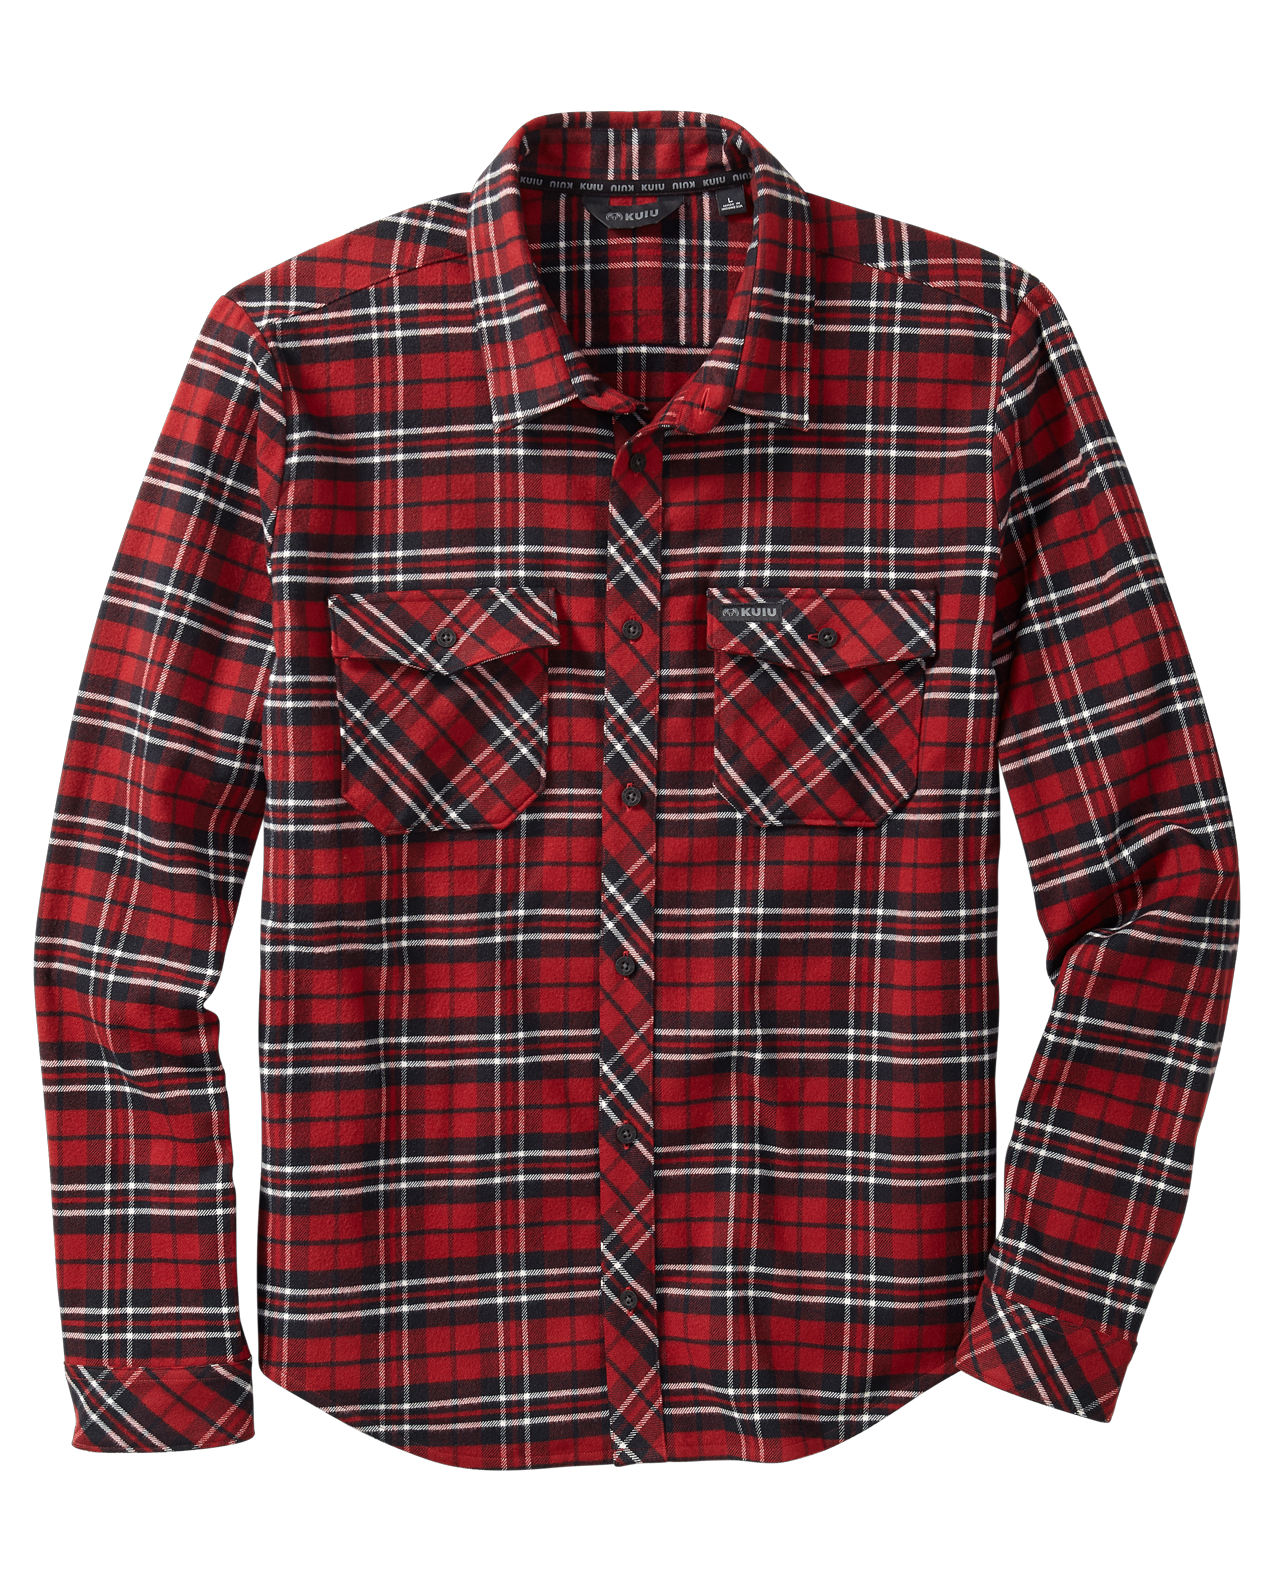 KUIU Outlet HW Plaid Flannel Shirt in Red Plaid | Size Medium